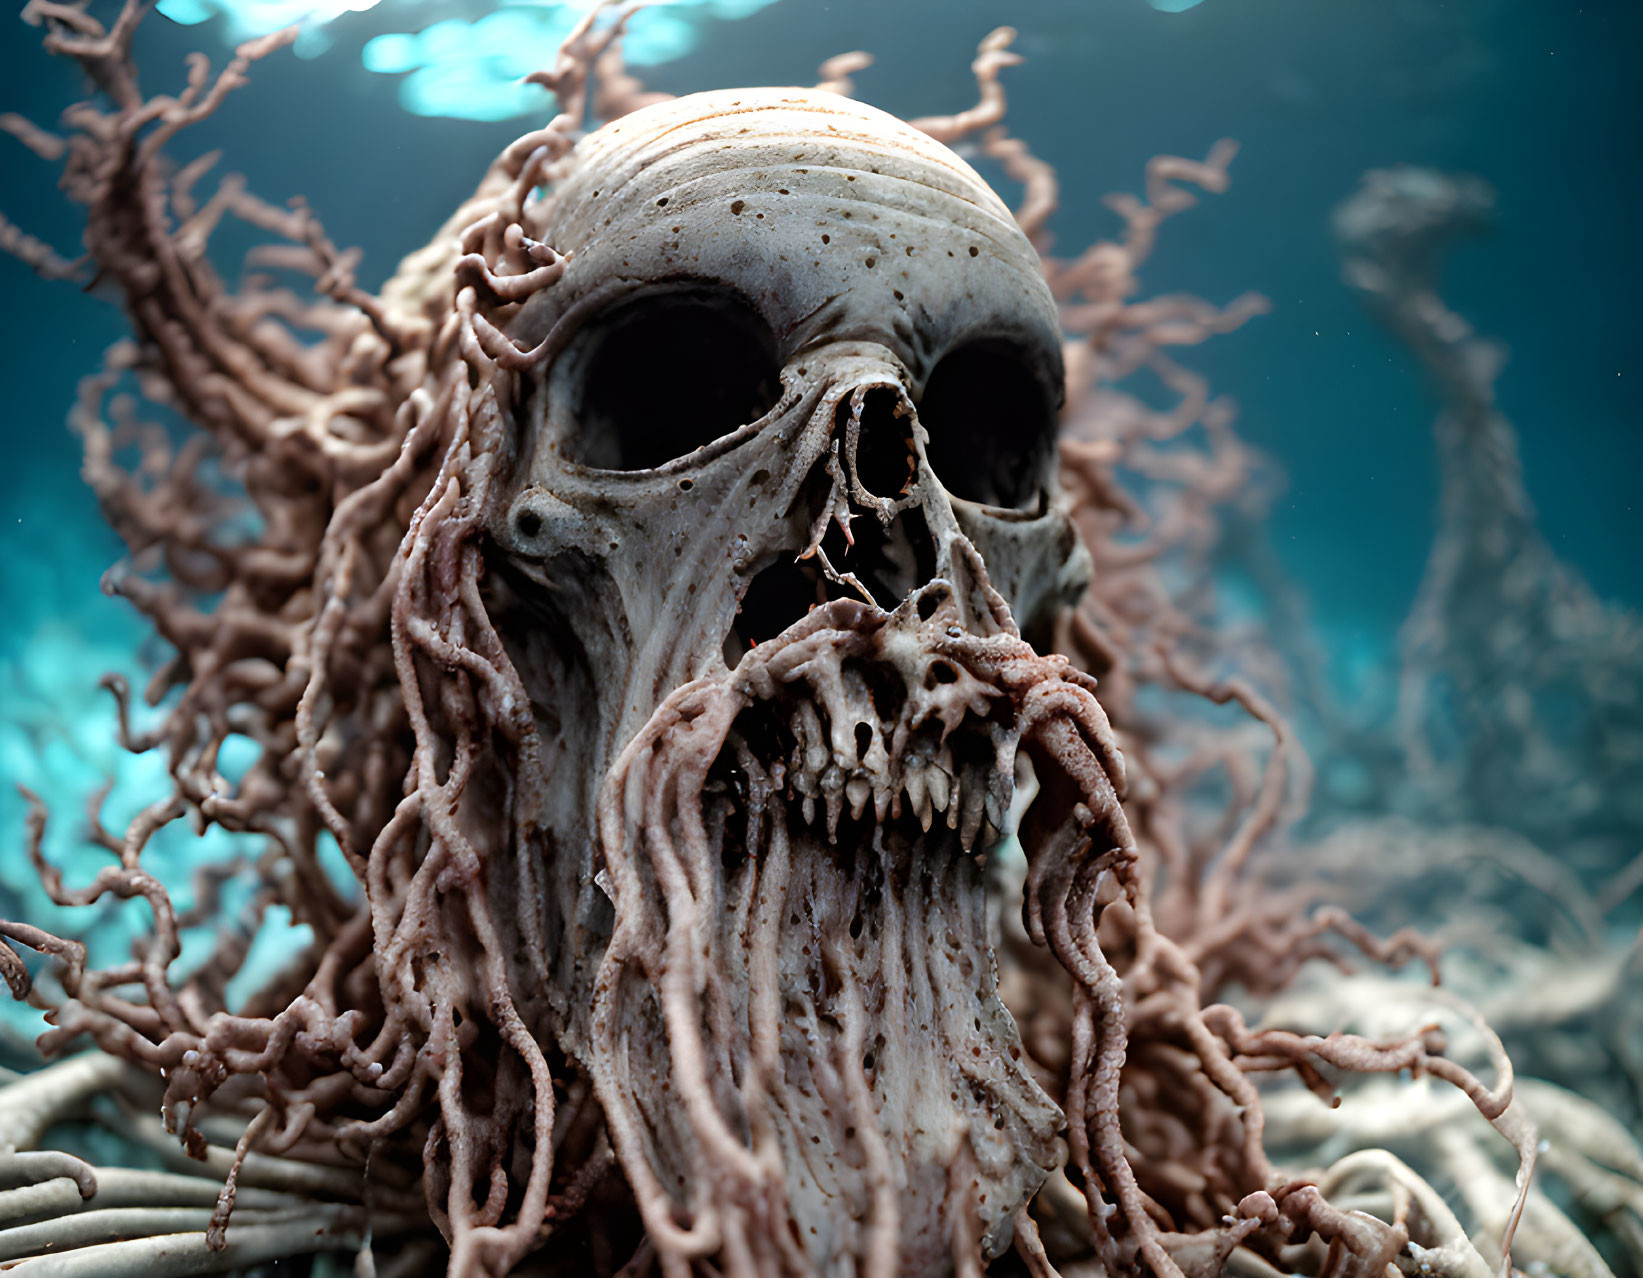 Skull surrounded by tentacles in underwater setting